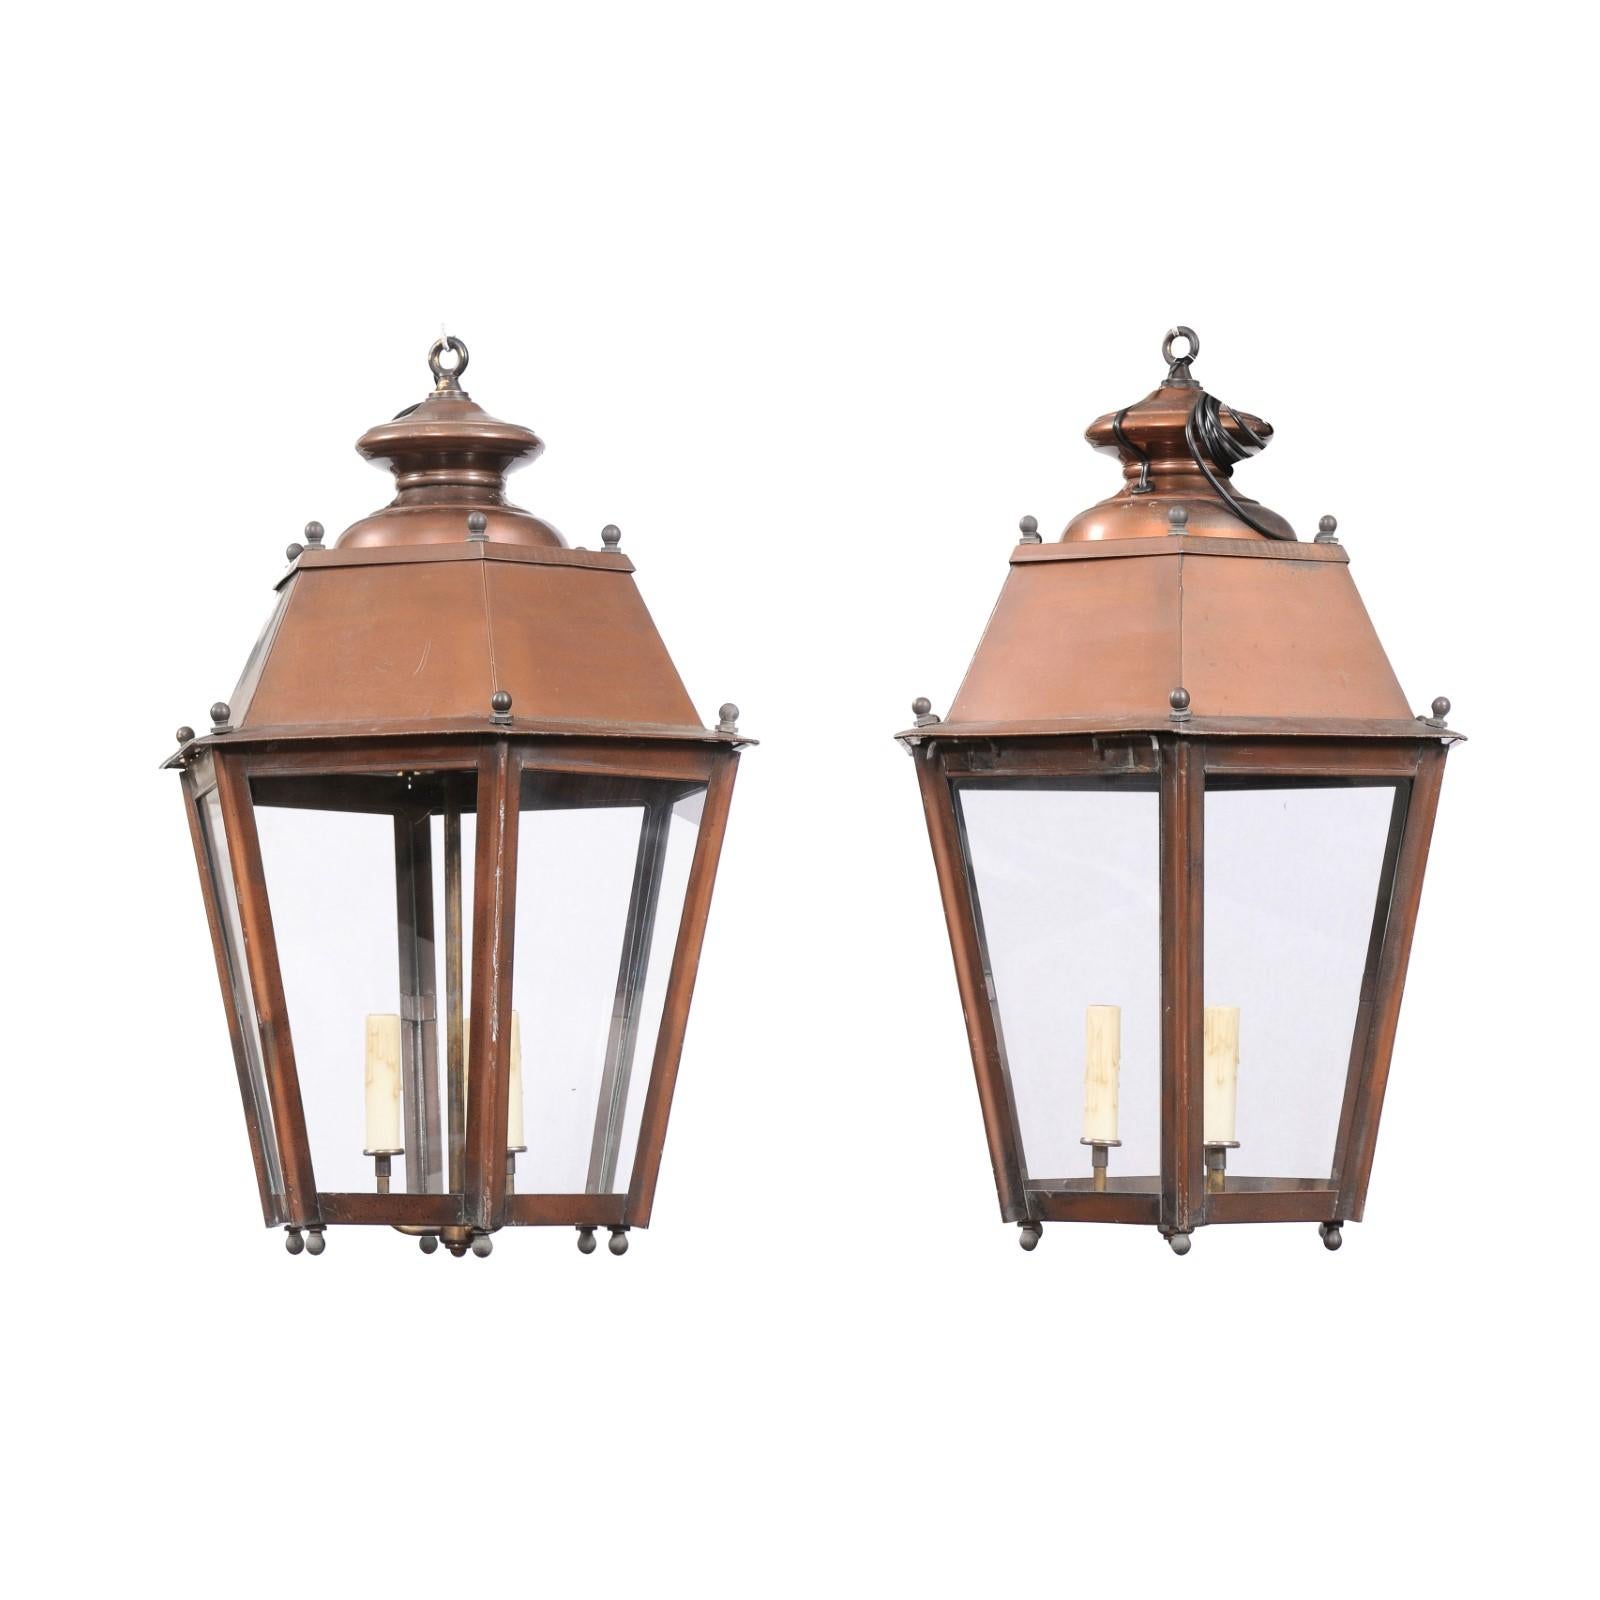 A pair of French hexagonal three-light copper lanterns from the 20th century with tapered lines, glass panels and petite spheres. Introducing a captivating pair of French hexagonal copper lanterns from the 20th century, a testament to timeless